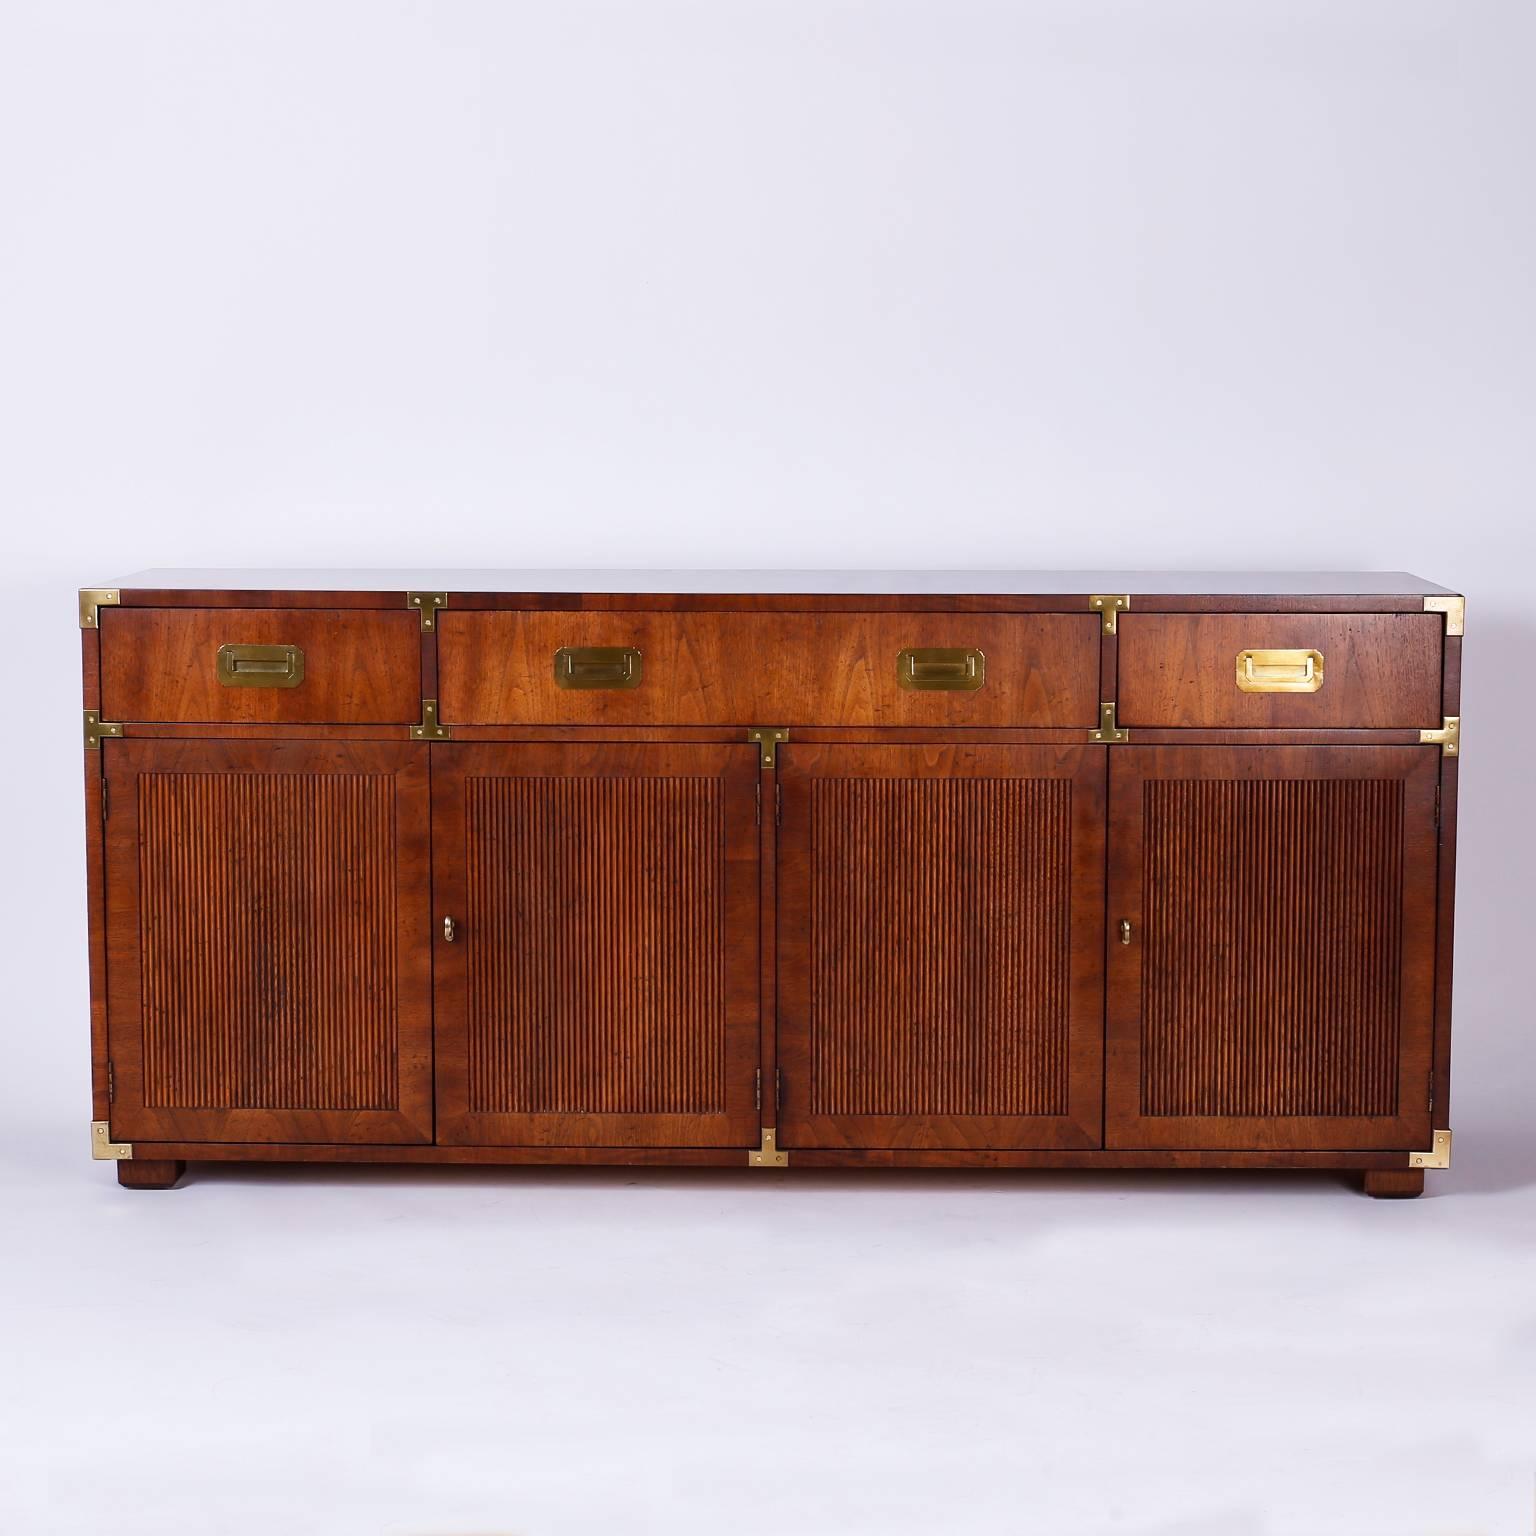 Handsome walnut credenza or sideboard with four beaded doors for
plenty of storage, three drawers above, and polished brass campaign
style hardware which draws on English influence combined with modern form. Branded Henredon in a drawer.